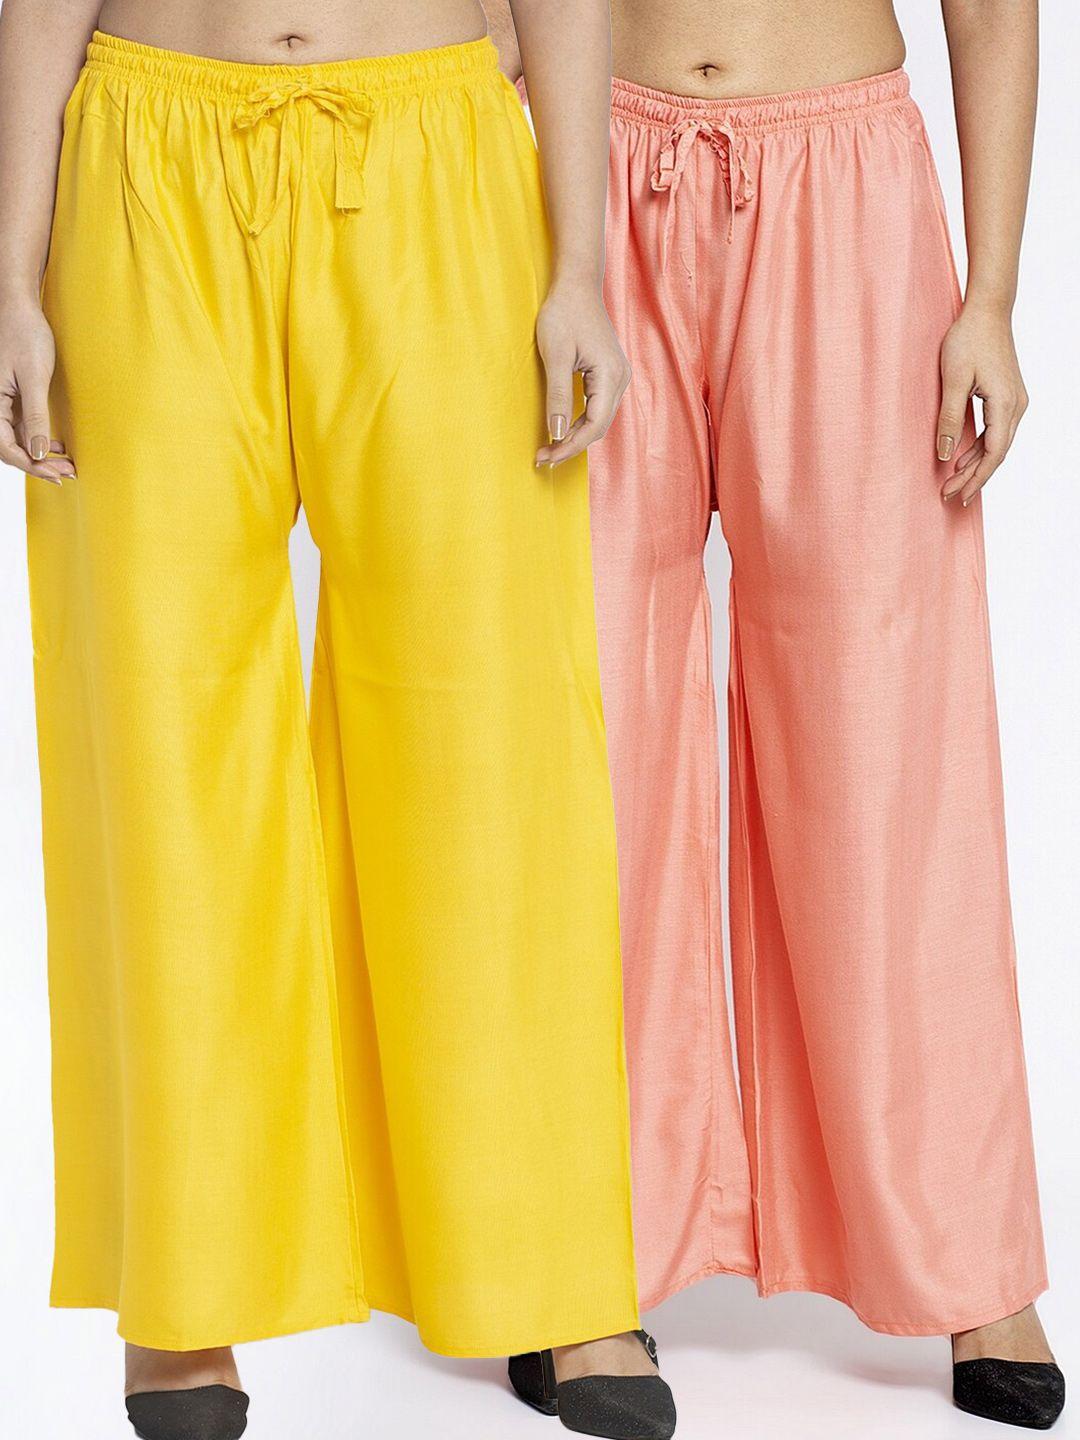 gracit women pack of 2 yellow & peach-coloured solid ethnic palazzos